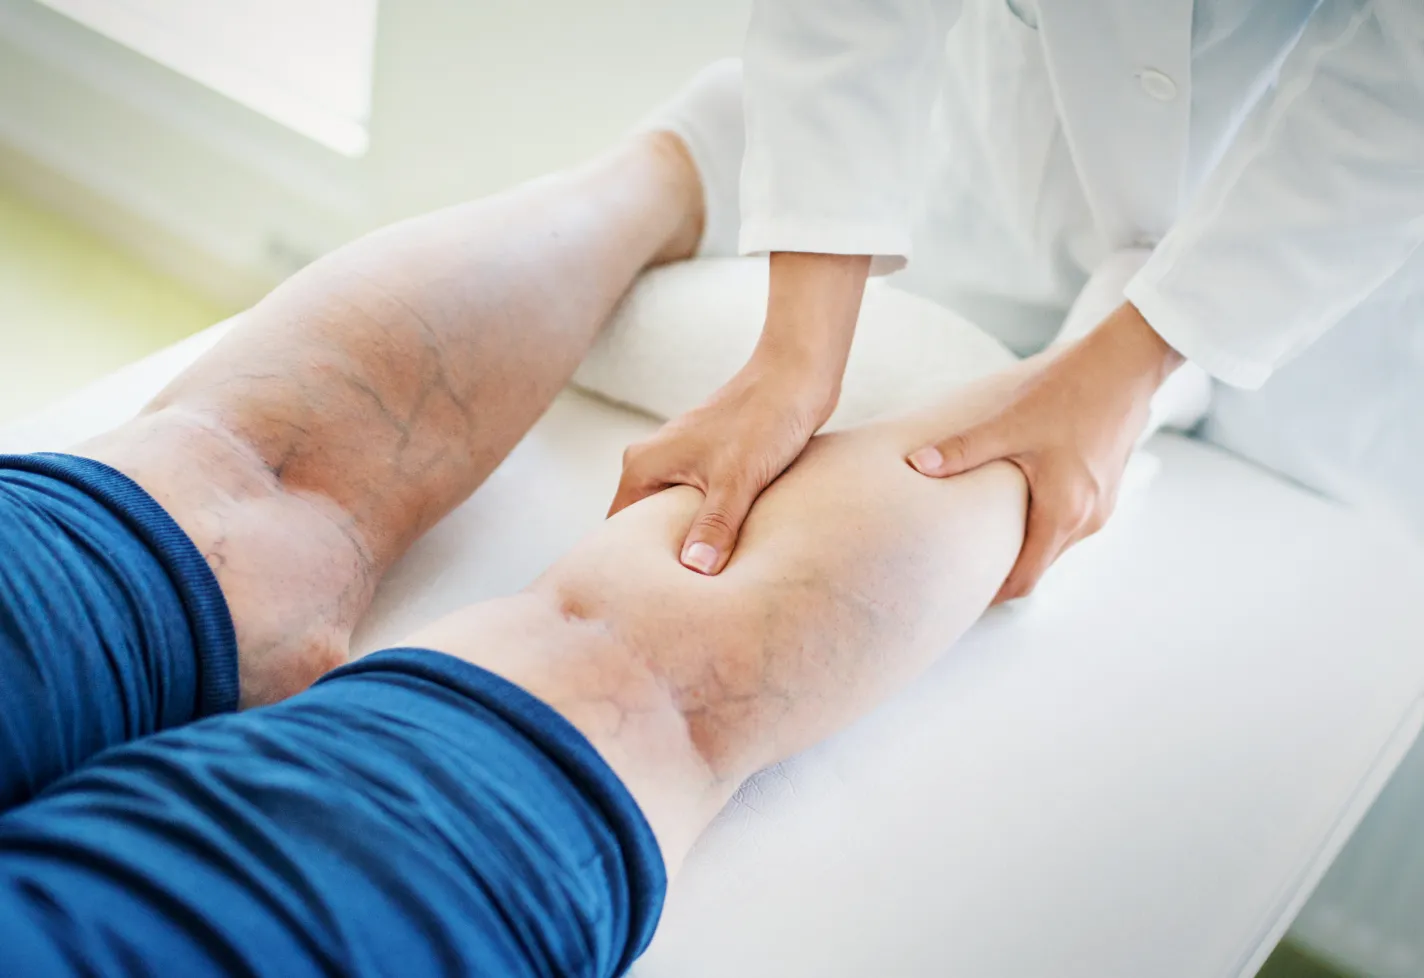 Clinical leg exam of a patients leg by a provider